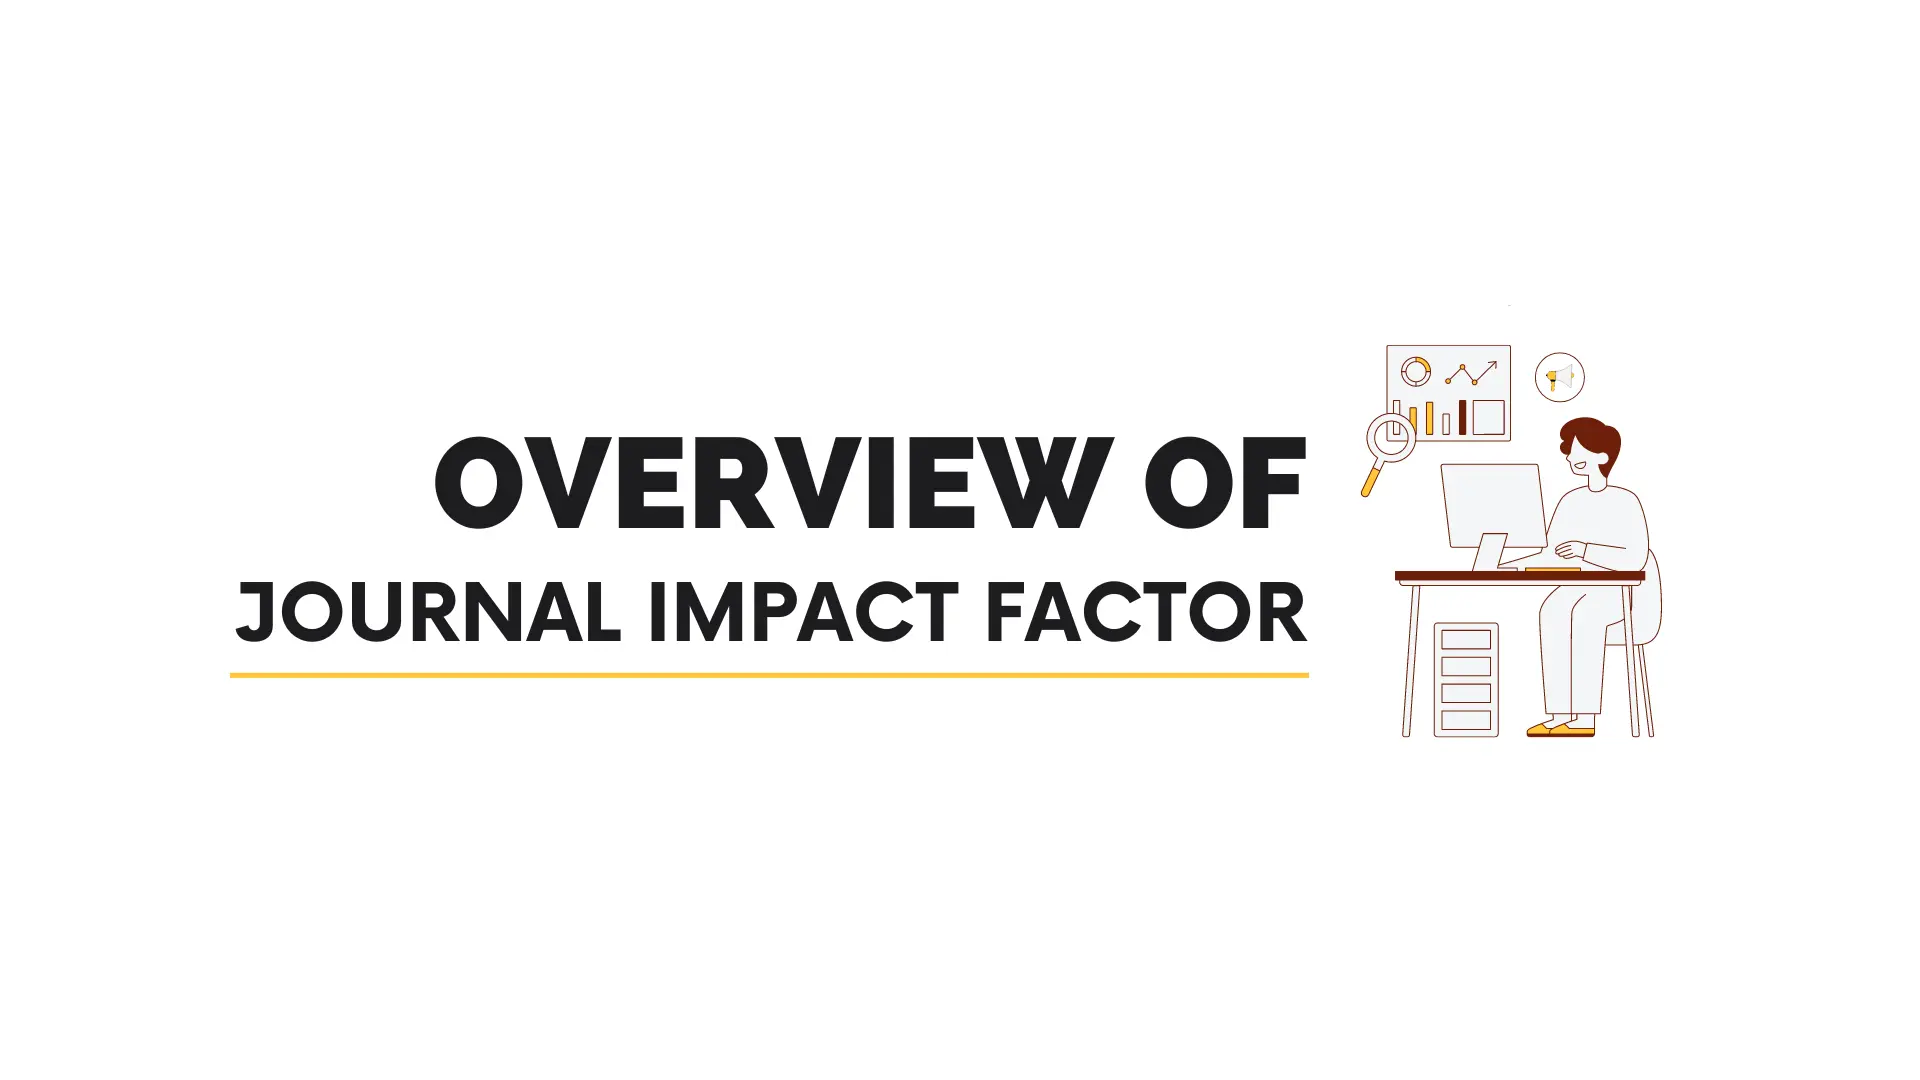 Overview of journal impact factor